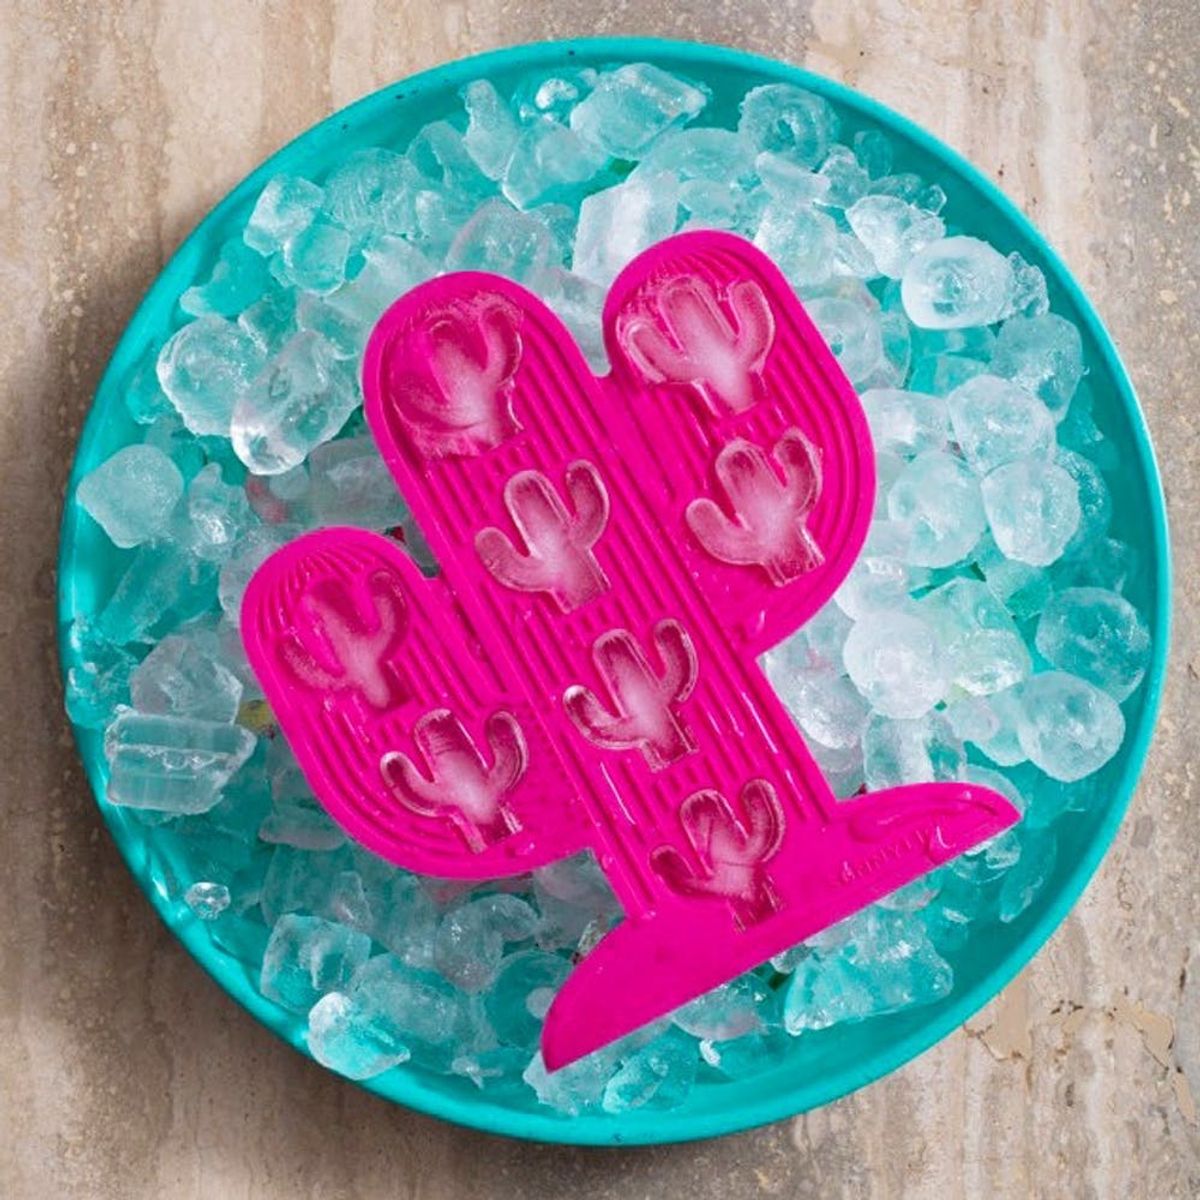 40 Hostess Gift Ideas for All Your Spring Parties